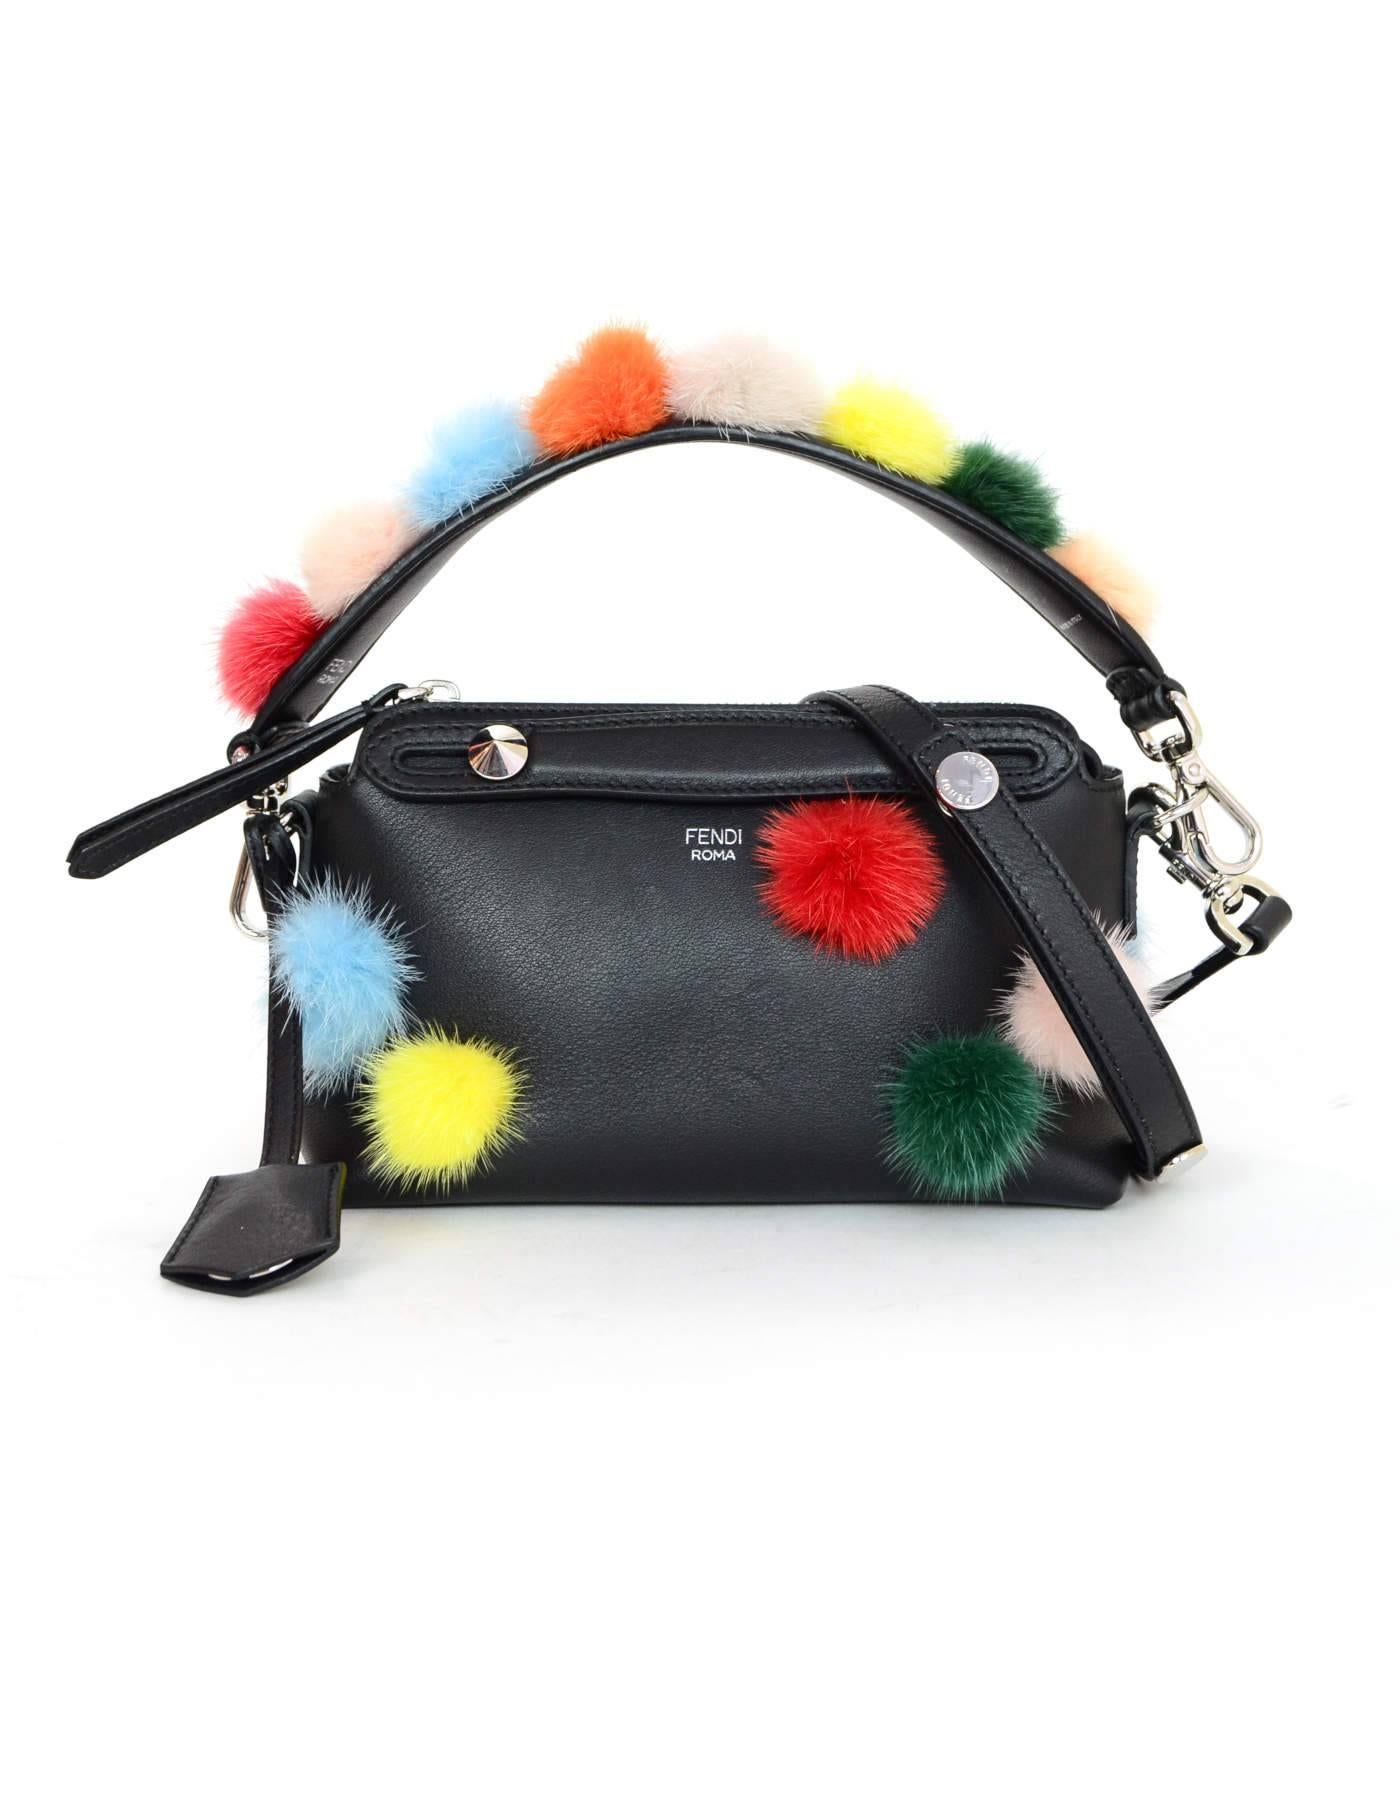 Fendi Black Leather & Mink Pom Pom Strap You Bag Strap
Features multi-color mink fur pom poms

Made In: Italy
Color: Black, multi
Hardware: Silvertone
Materials: Leather, mink
Retail Price: $750 + tax
Overall Condition: Excellent pre-owned